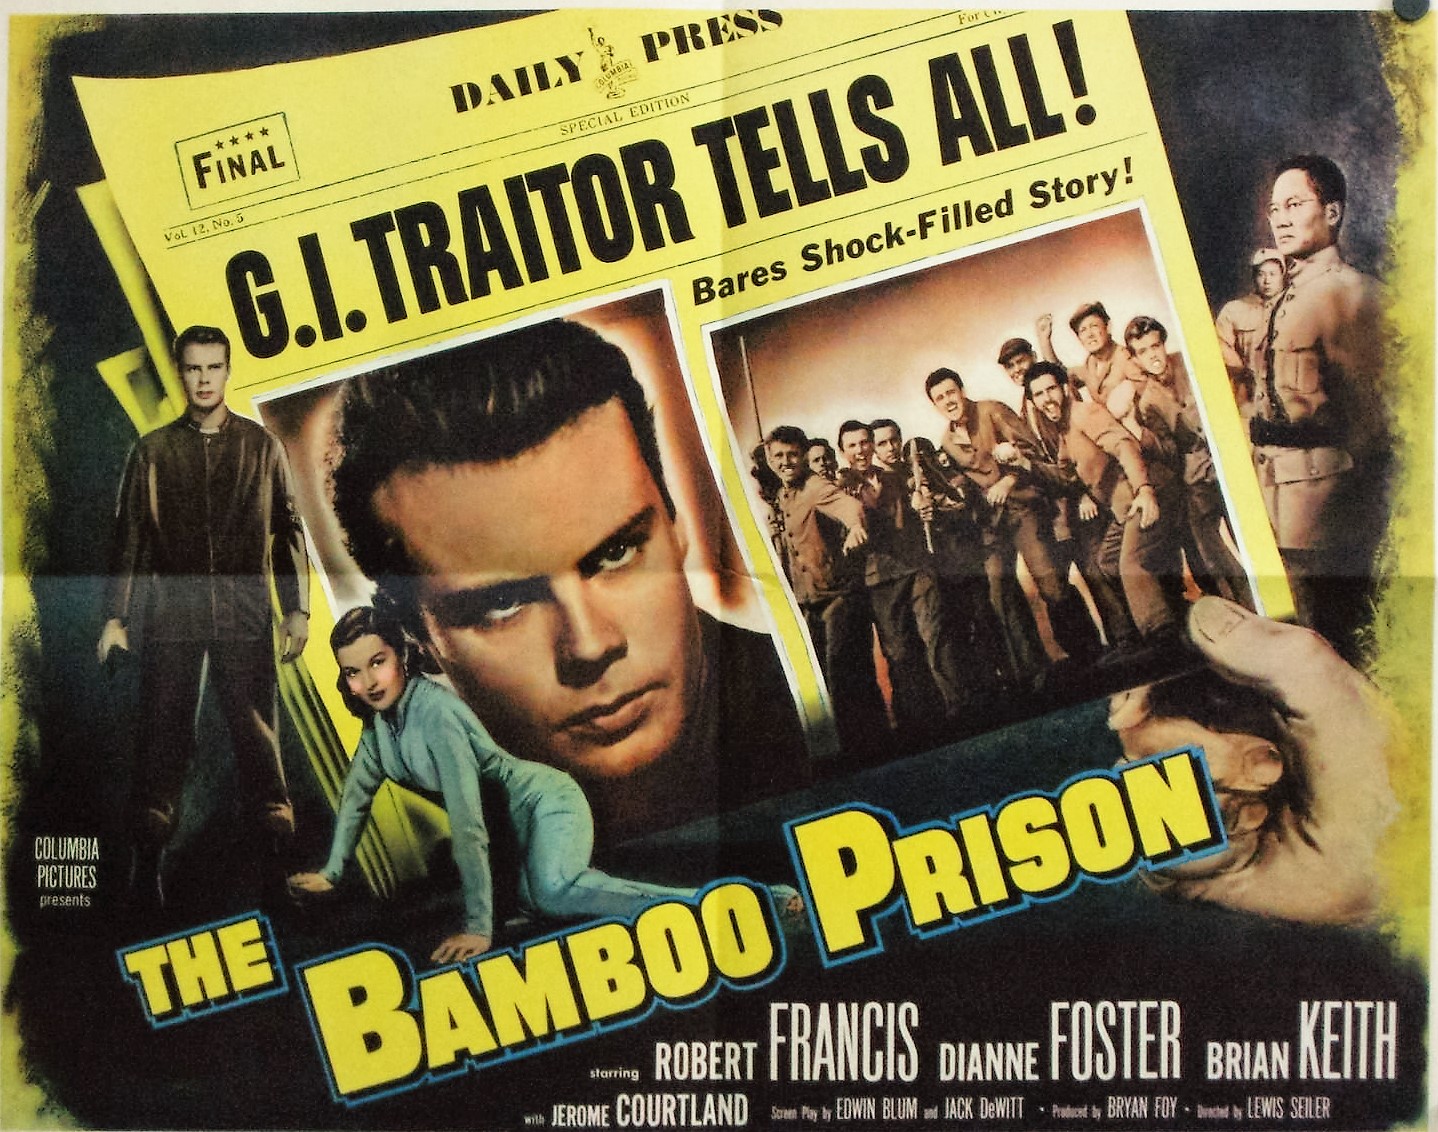   The Bamboo Prison  released Jan. 1955  Bob’s touring in Winter and Spring 1955 was tied more to  The Long Gray Line  (released in Feb.) than to  The Bamboo Prison  . The latter received press attention because of efforts in various cities to censor